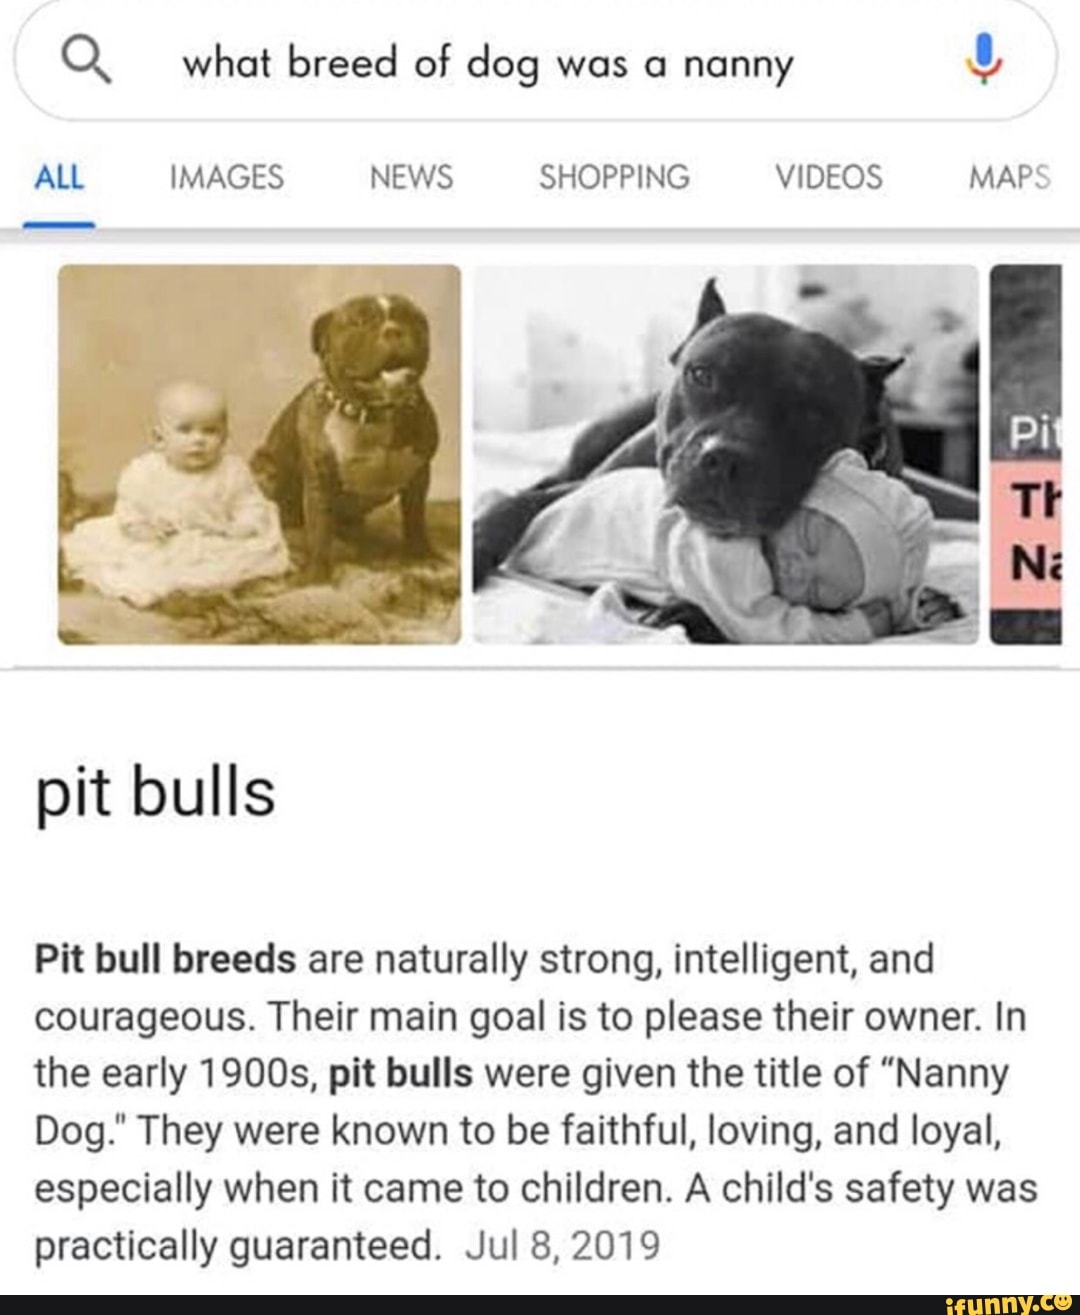 are pitbulls considered nanny dogs